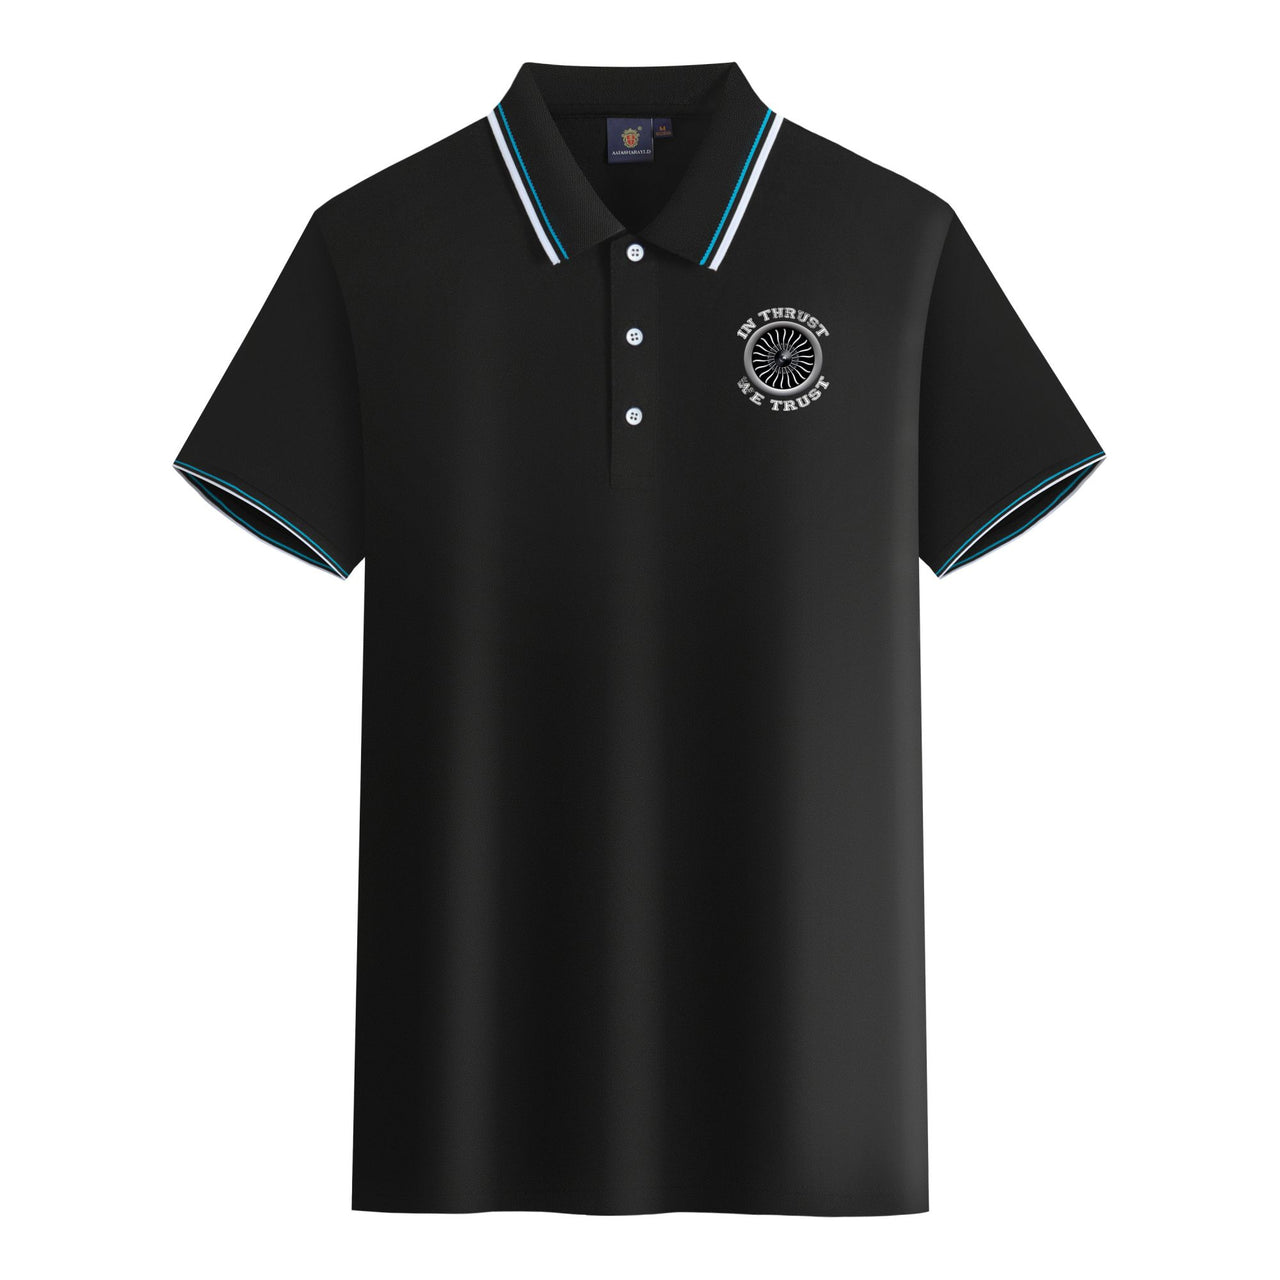 In Thrust We Trust (Vol 2) Designed Stylish Polo T-Shirts